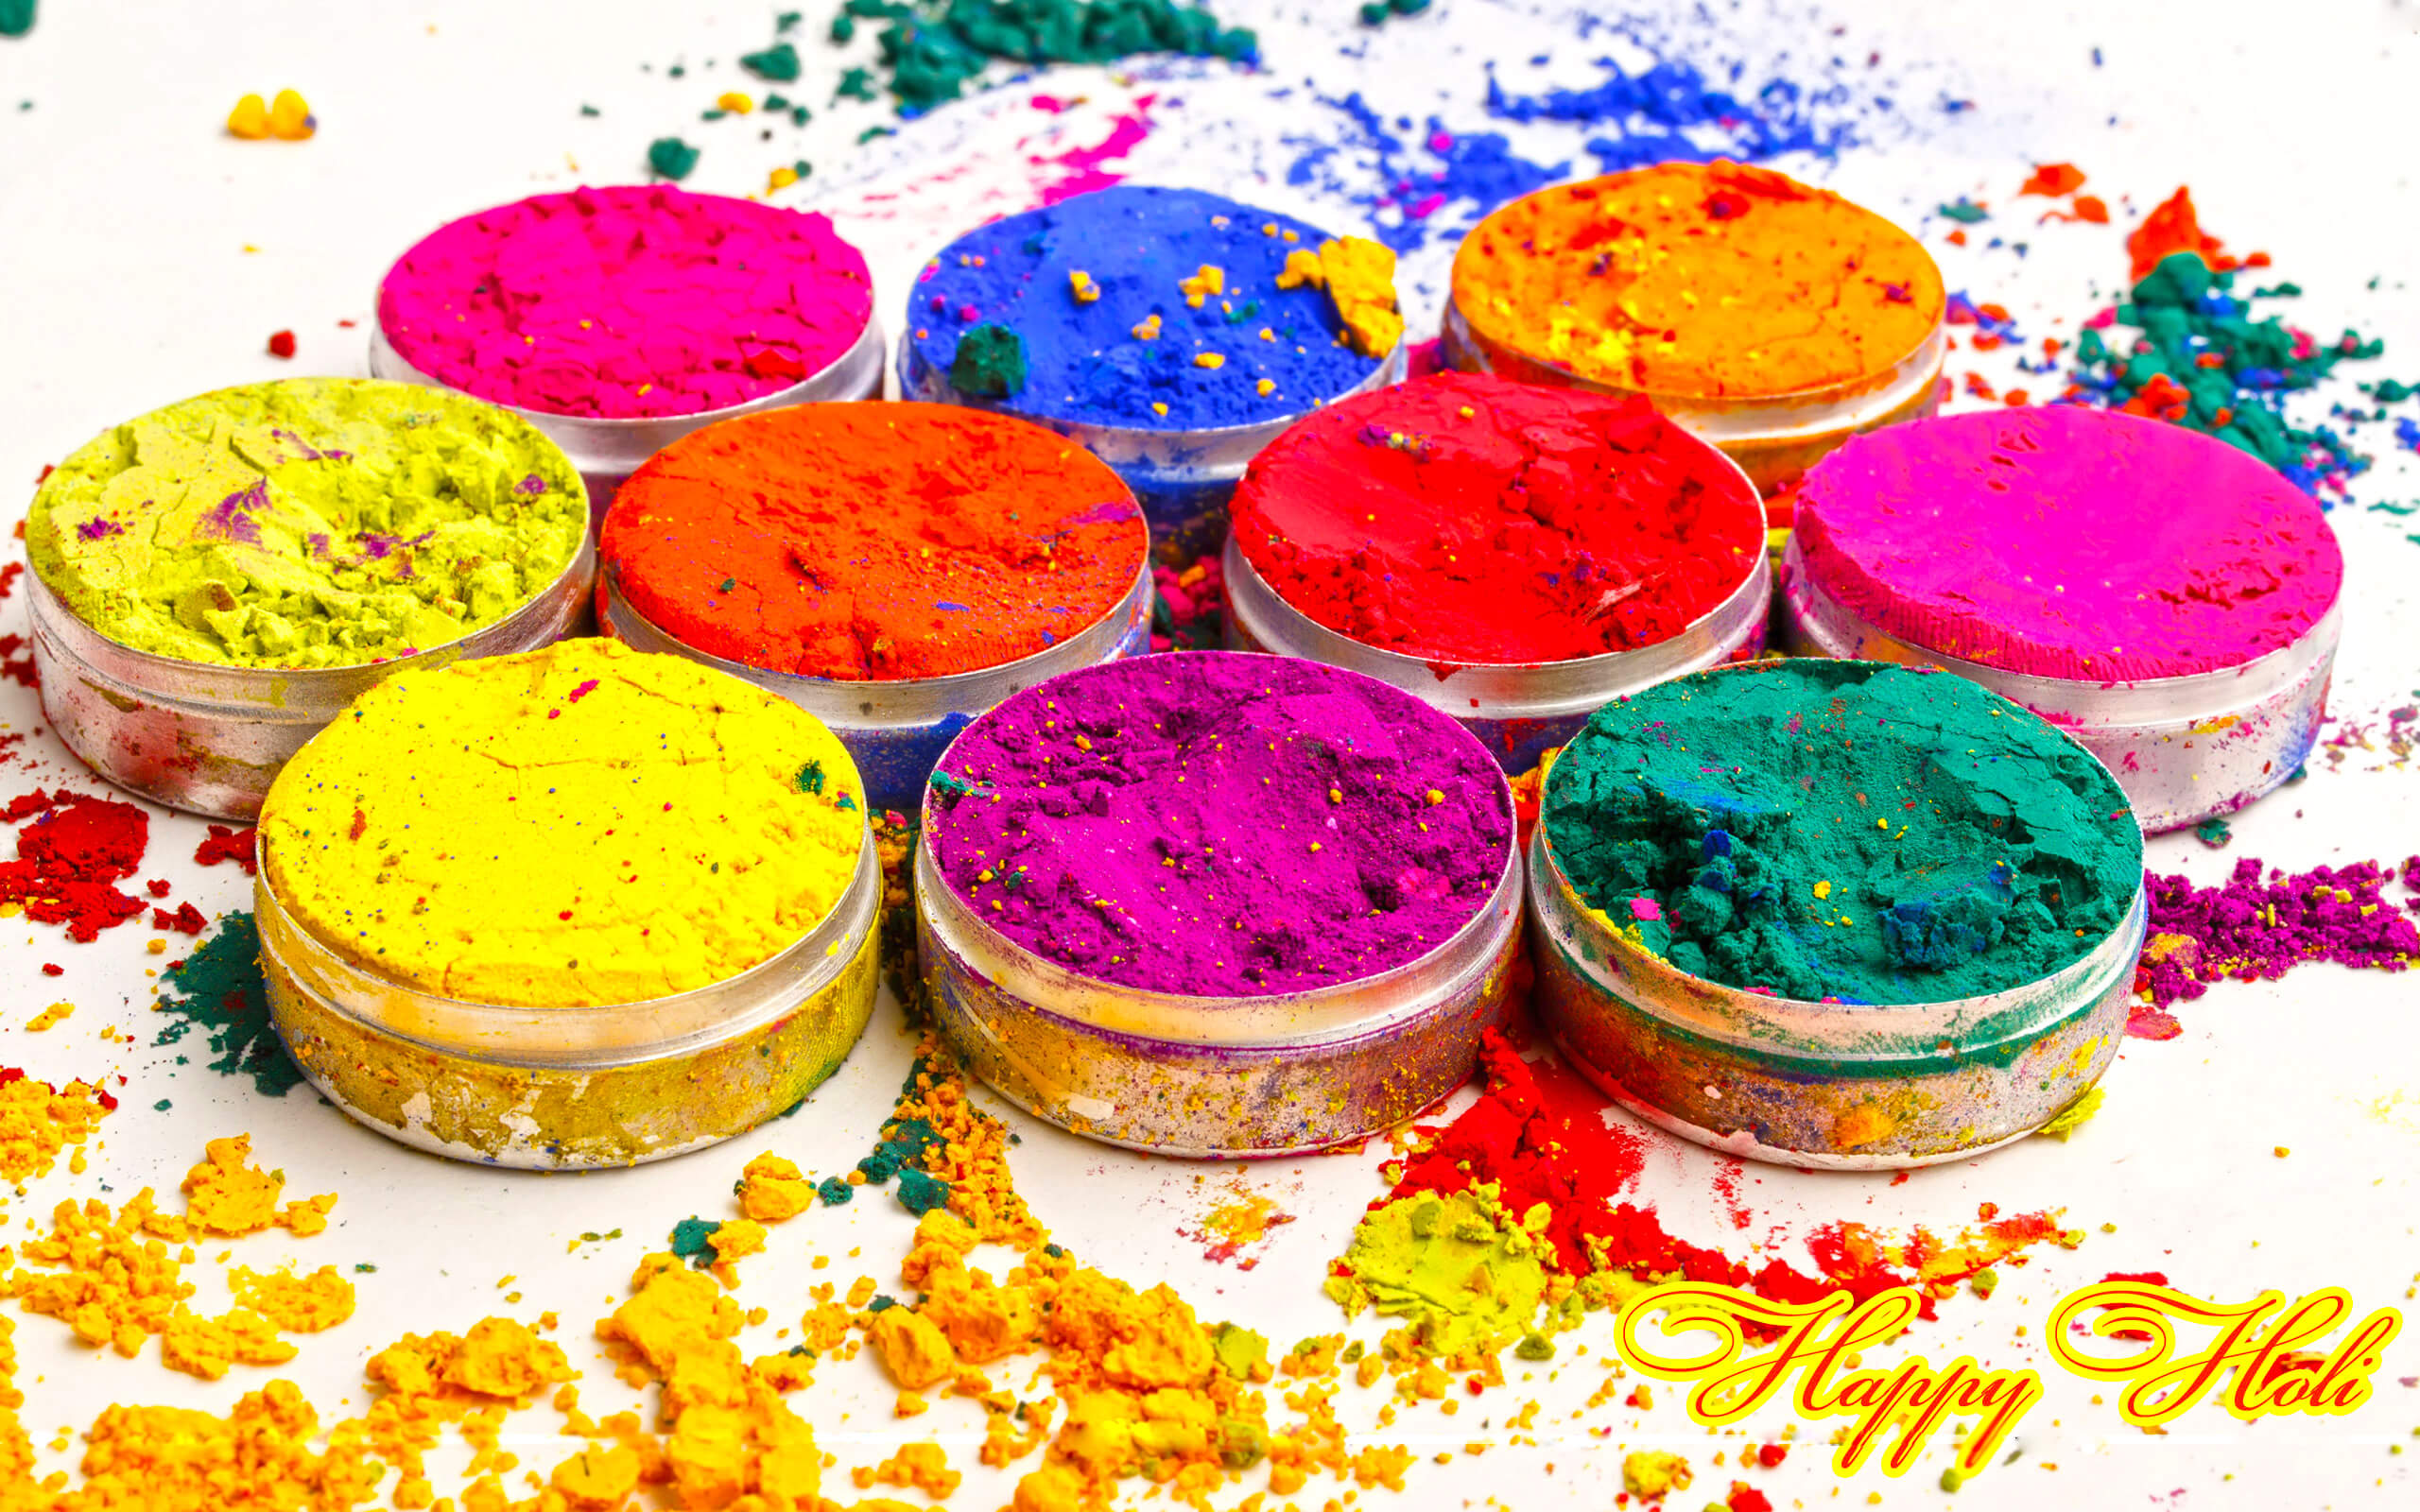 happy holi colorful images, wallpapers, photos hd